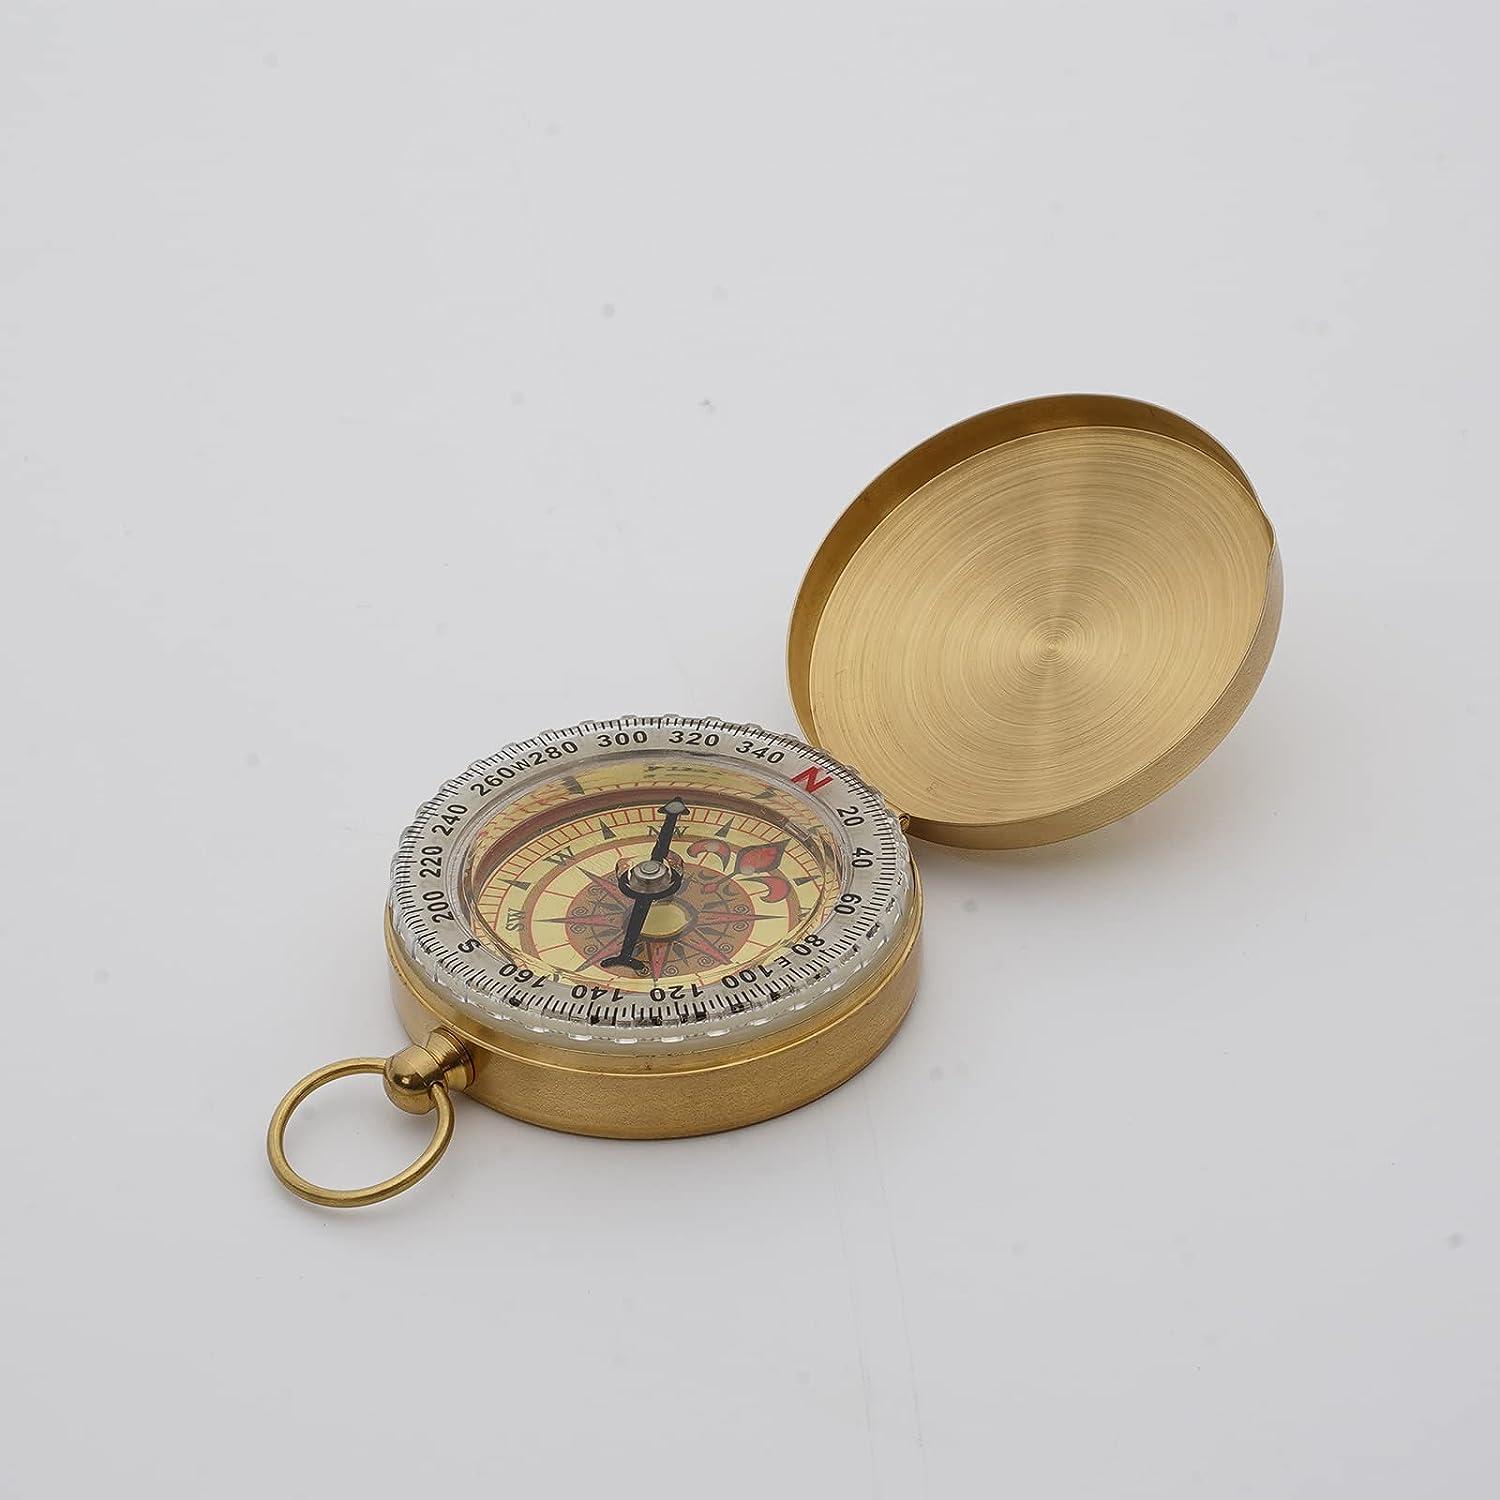 Pocket Compass,Portable Pocket Watch Compass,Classic Pocket Compass for  Kids Adult for Comping,Hiking, Mountaineering and Other Outdoor Activities